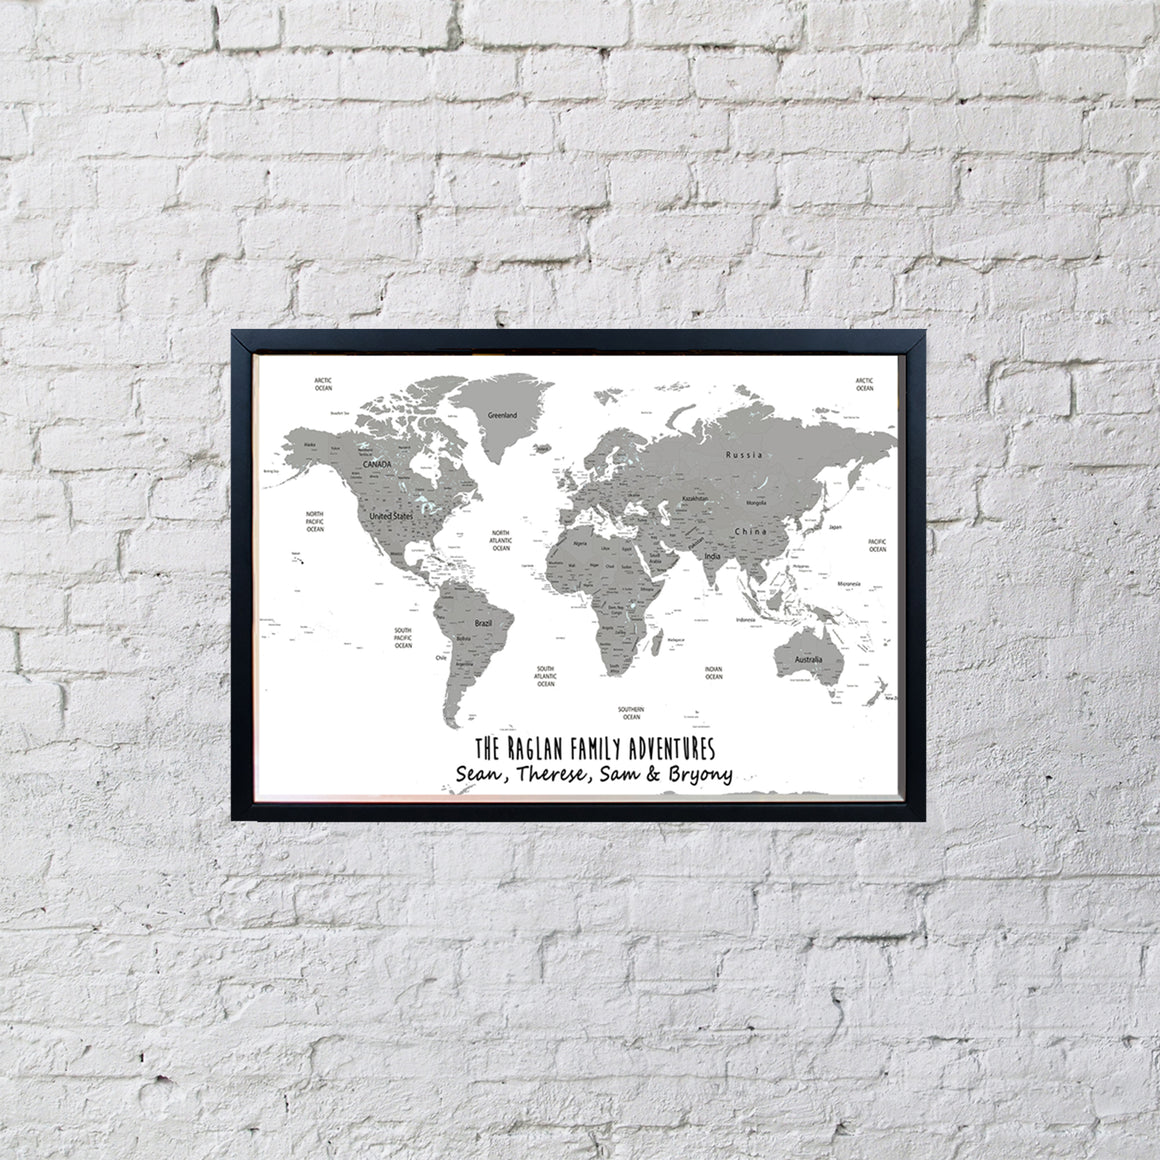 Personalised World Map Framed Pin Board in White & Grey is a perfect addition to any home. Personalise this Map with an inspirational quote or family names, and track past and future travels by placing pins on the destinations of choice.